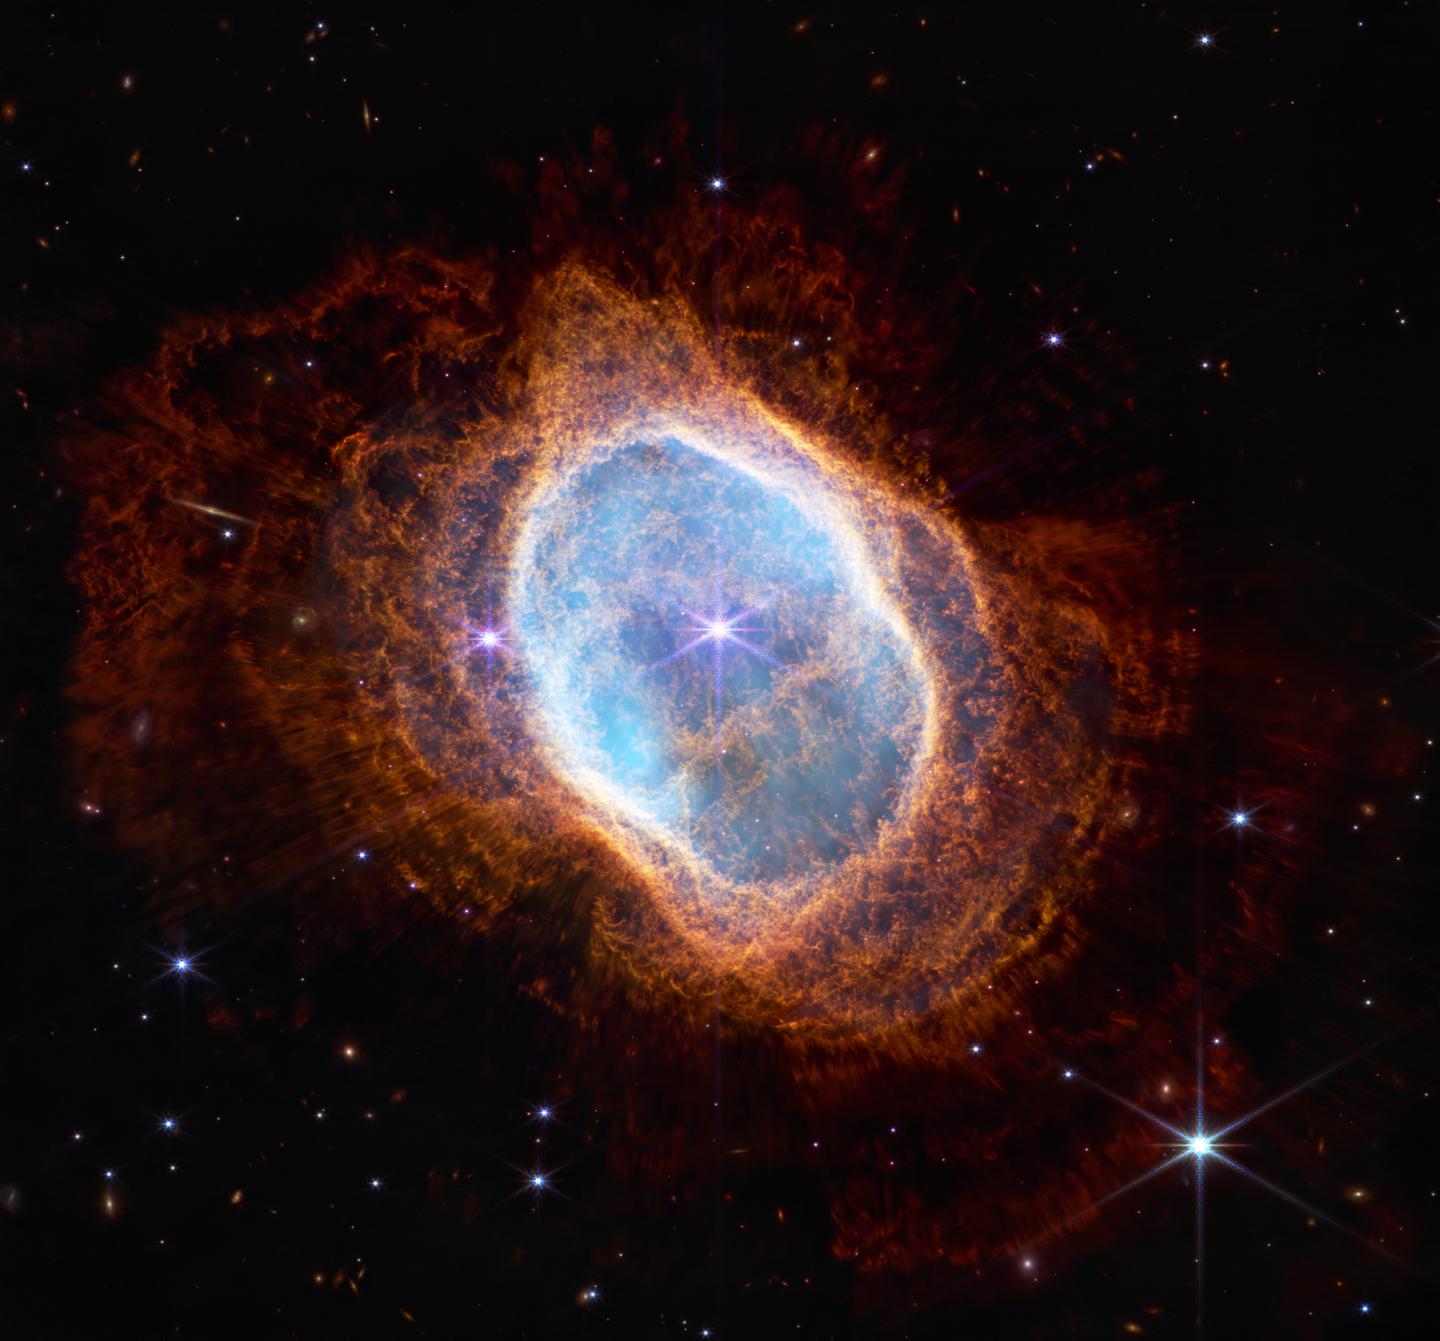 Colorful image of near-infrared light from a glowing cloud with a distorted ring-like shape, illuminated from within by a bright central star. The Southern Ring Nebula is a large, semi-transparent oval that is slightly angled from top left to bottom right. A bright white star appears at the center of this image.